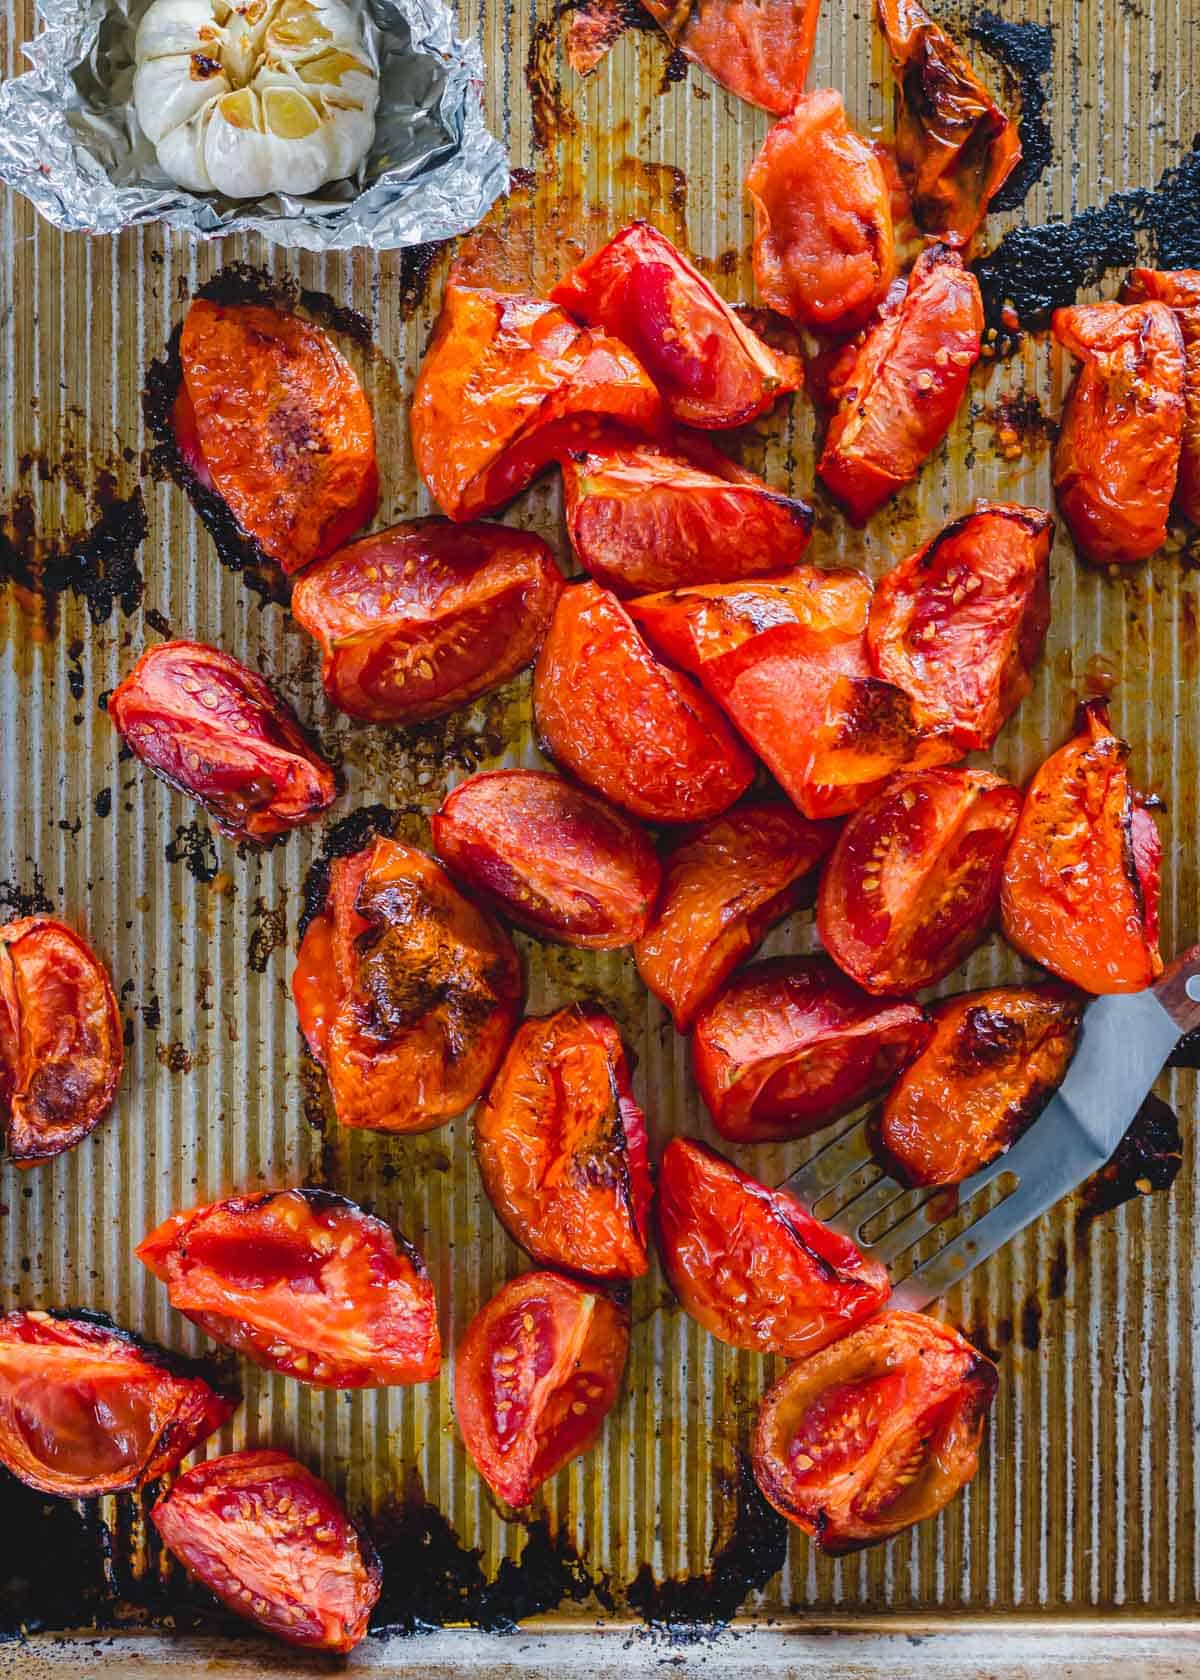 Roasted tomatoes and roasted head of garlic on a baking sheet.